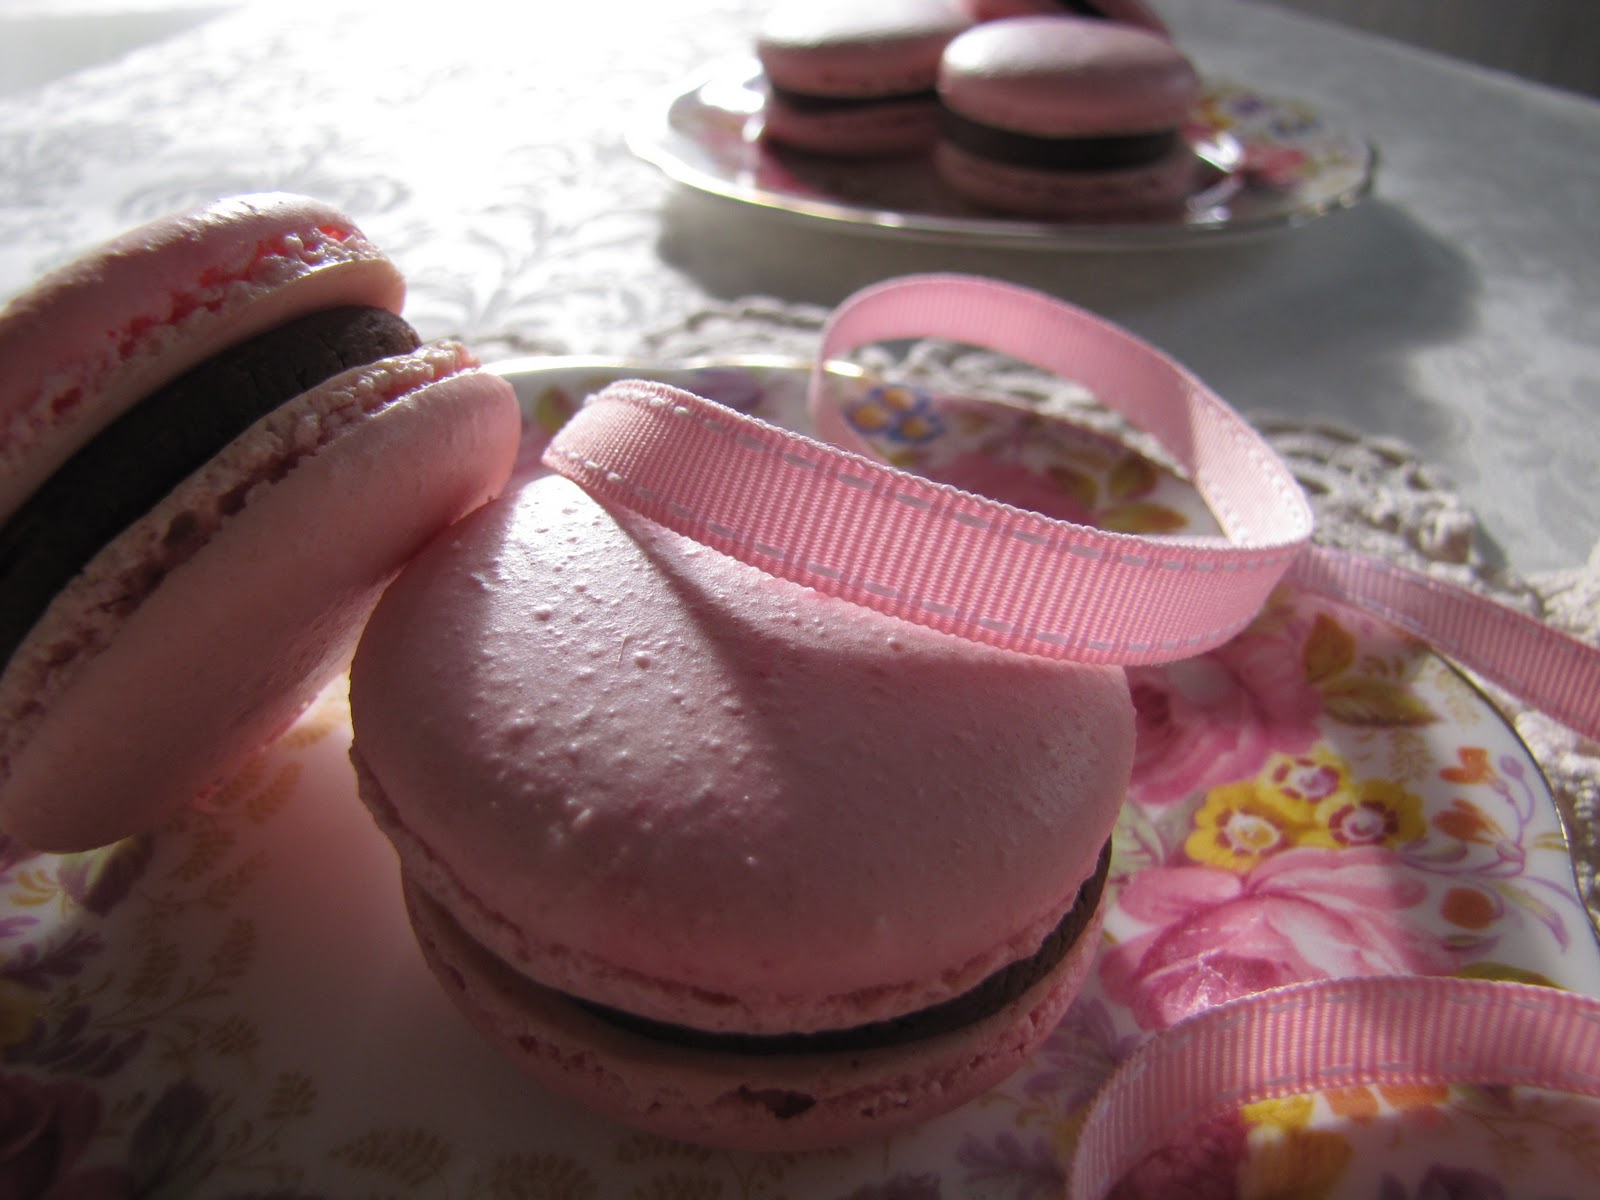 my button cake: turkish delight macarons